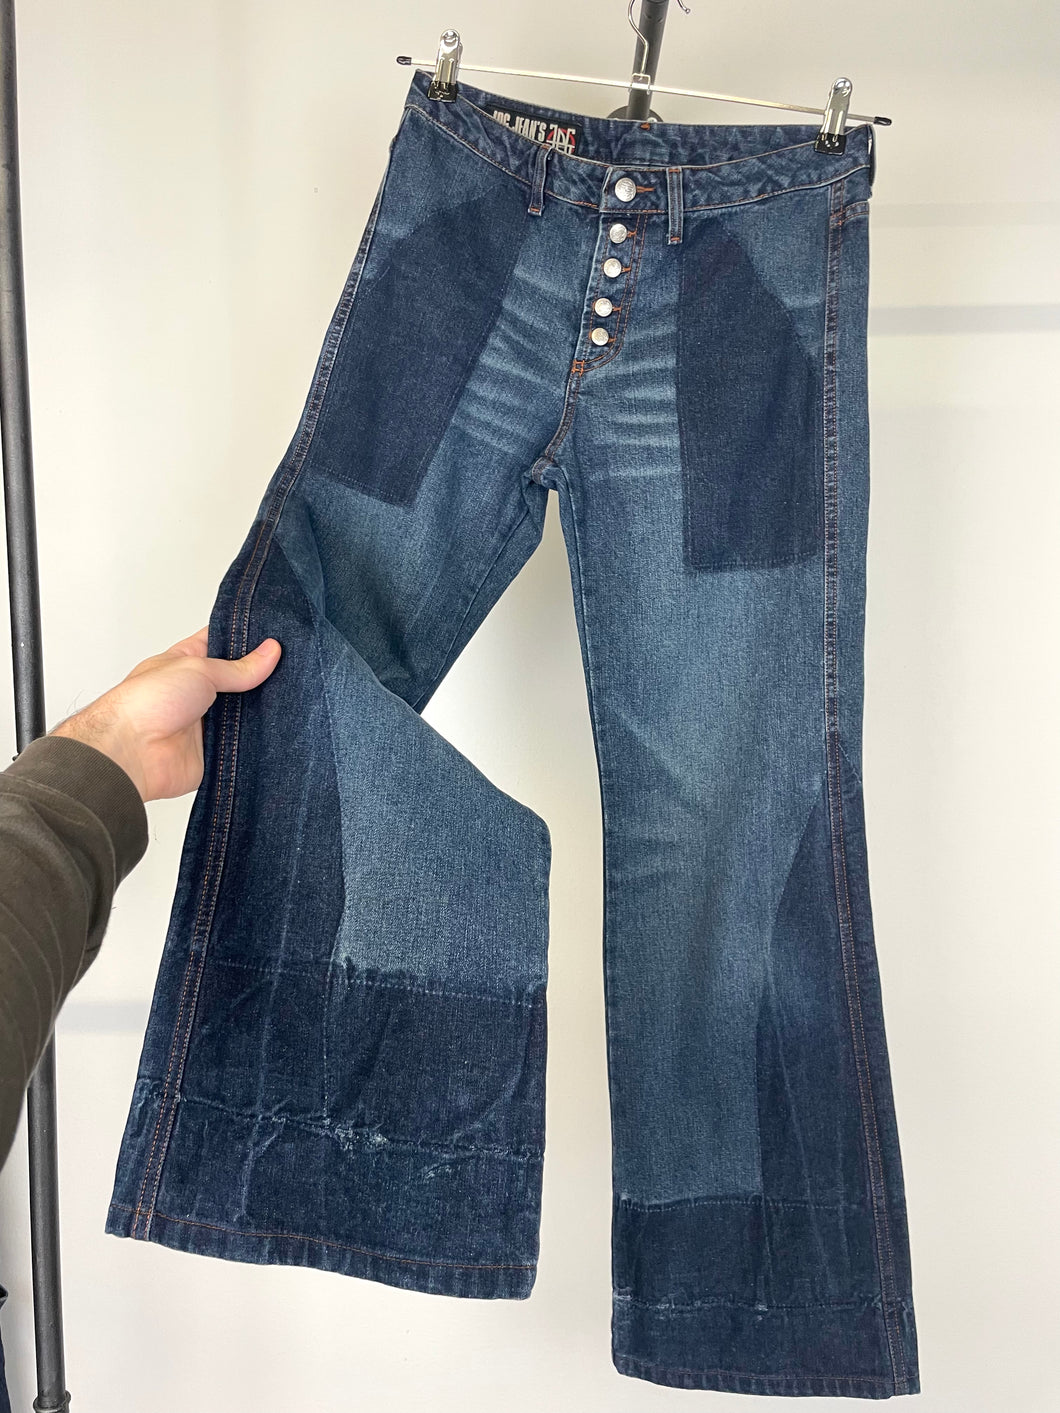 SS2003 Jean Paul Gaultier flared patchwork jeans